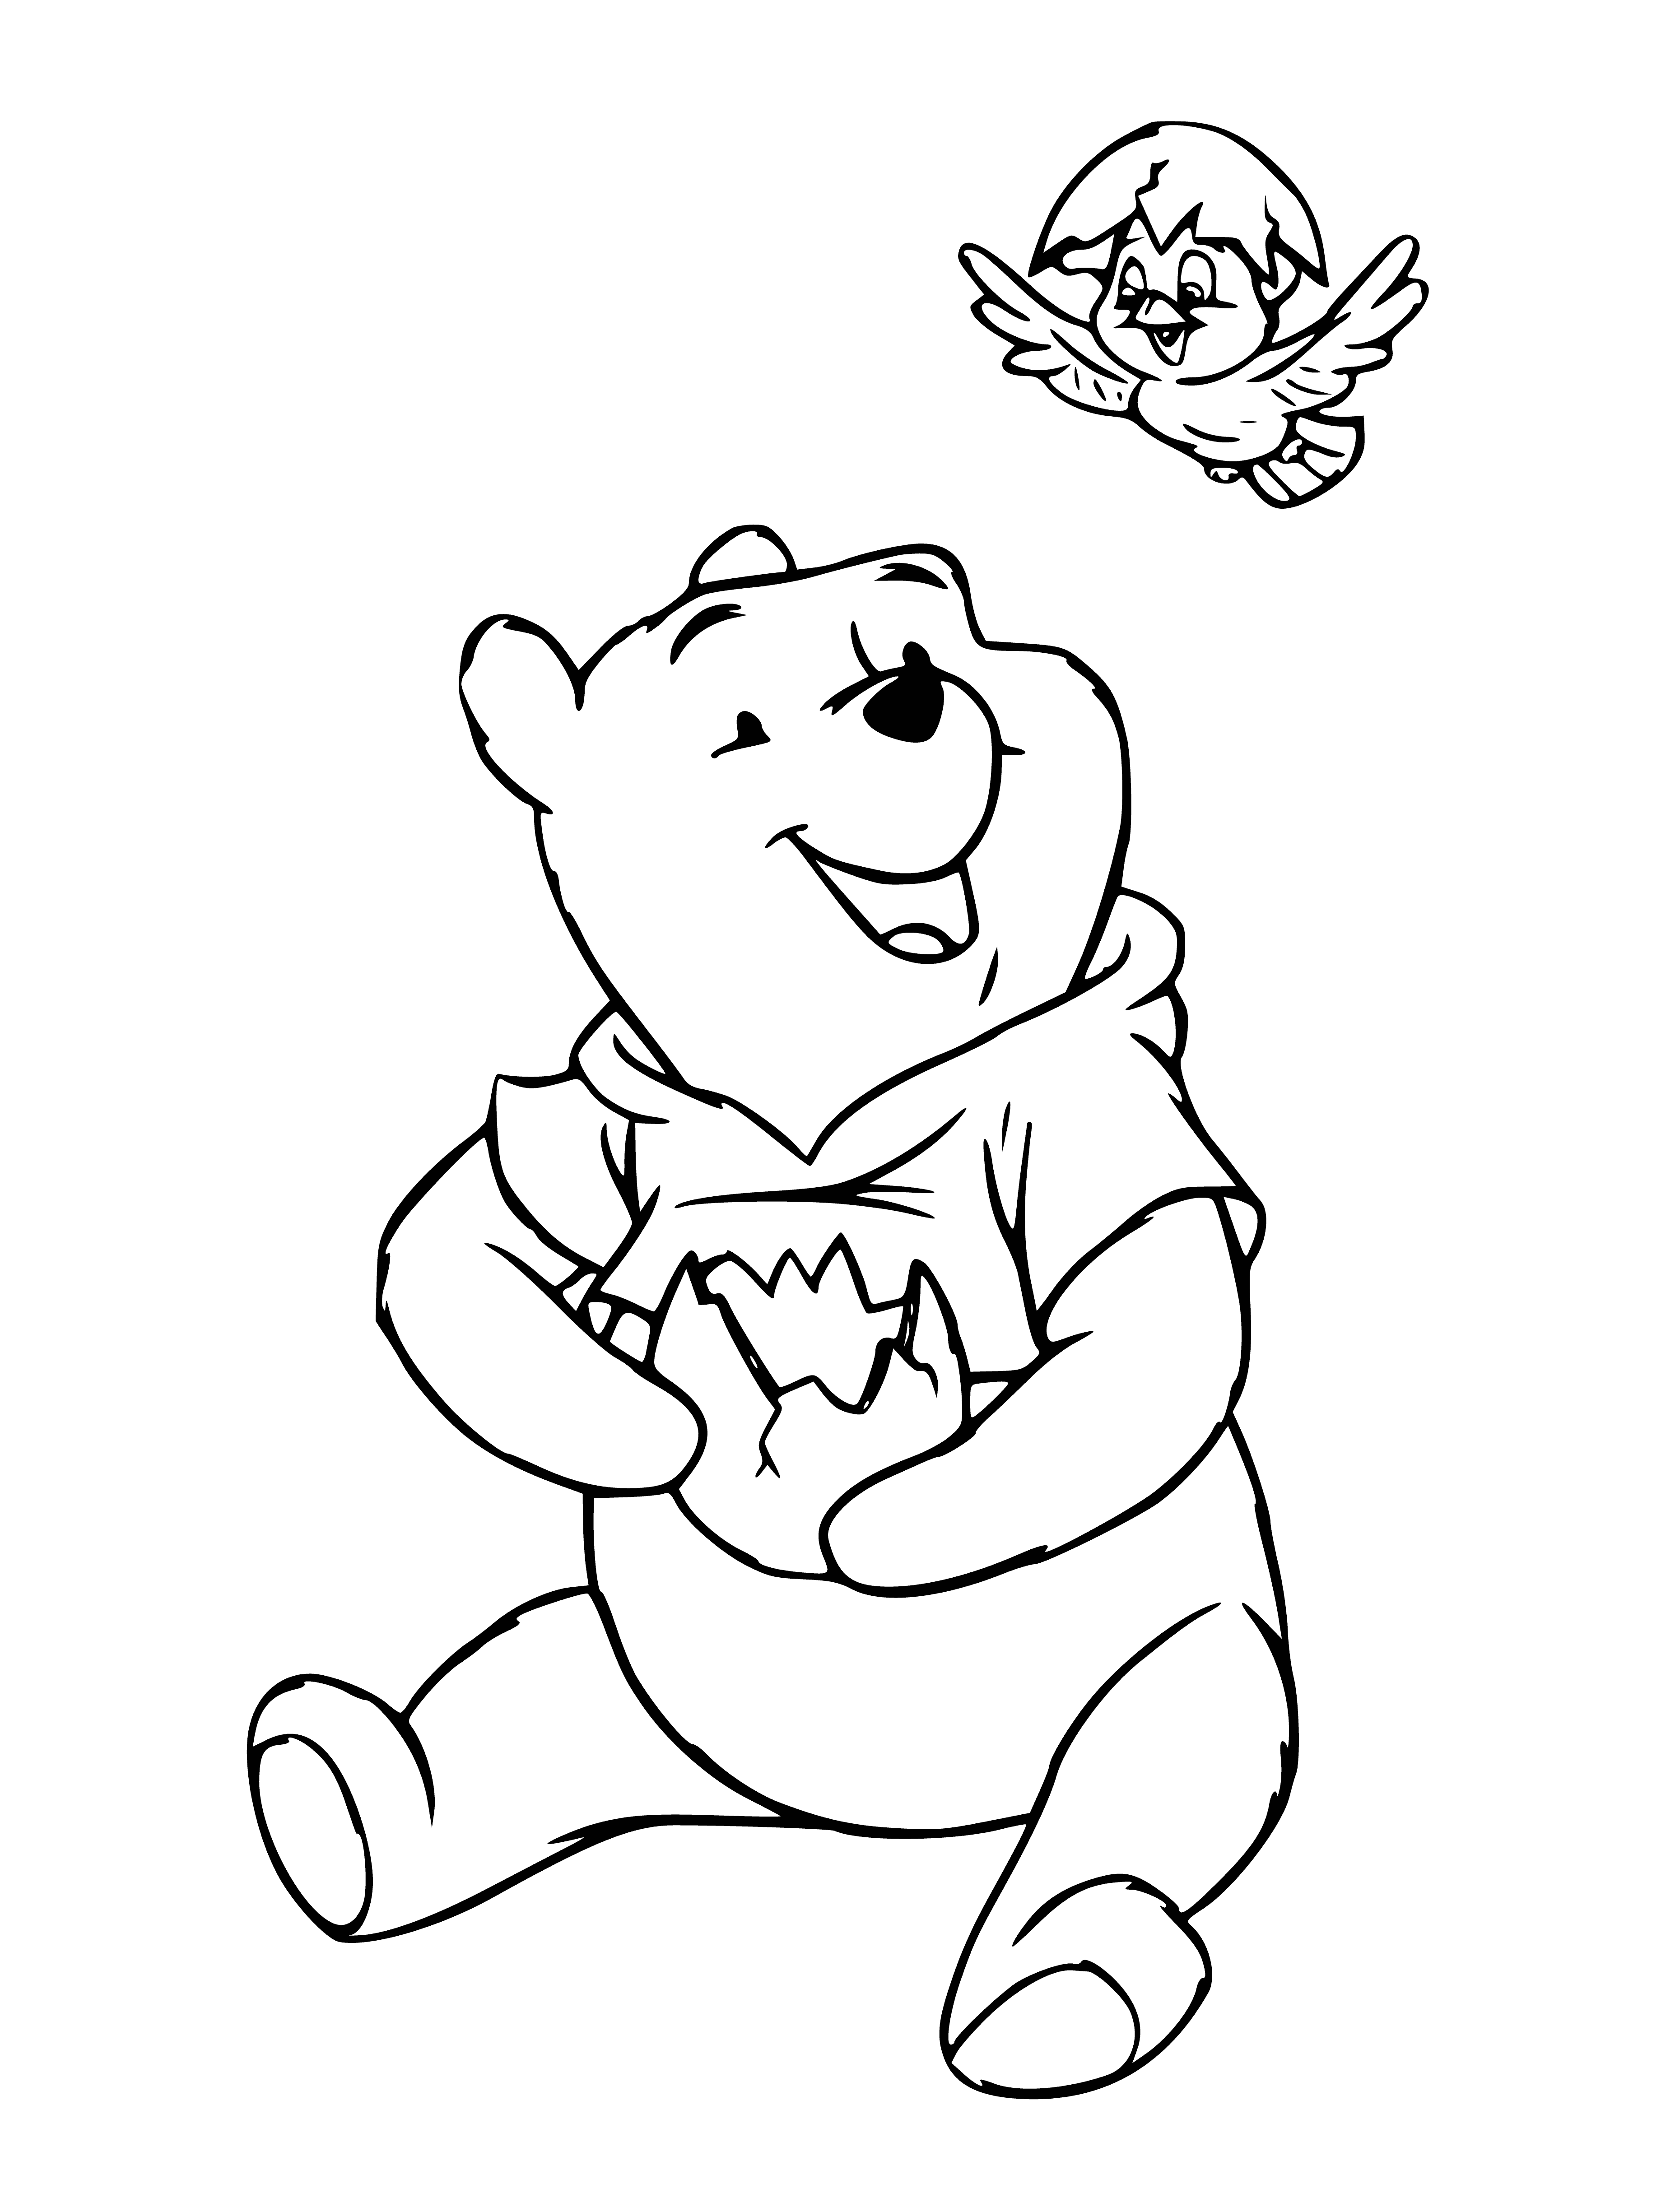 coloring page: White rabbit and chicks holding Easter egg in yellow and blue medallion, surrounded by white chicks. Words "Disney Easter" at bottom. #Coloring